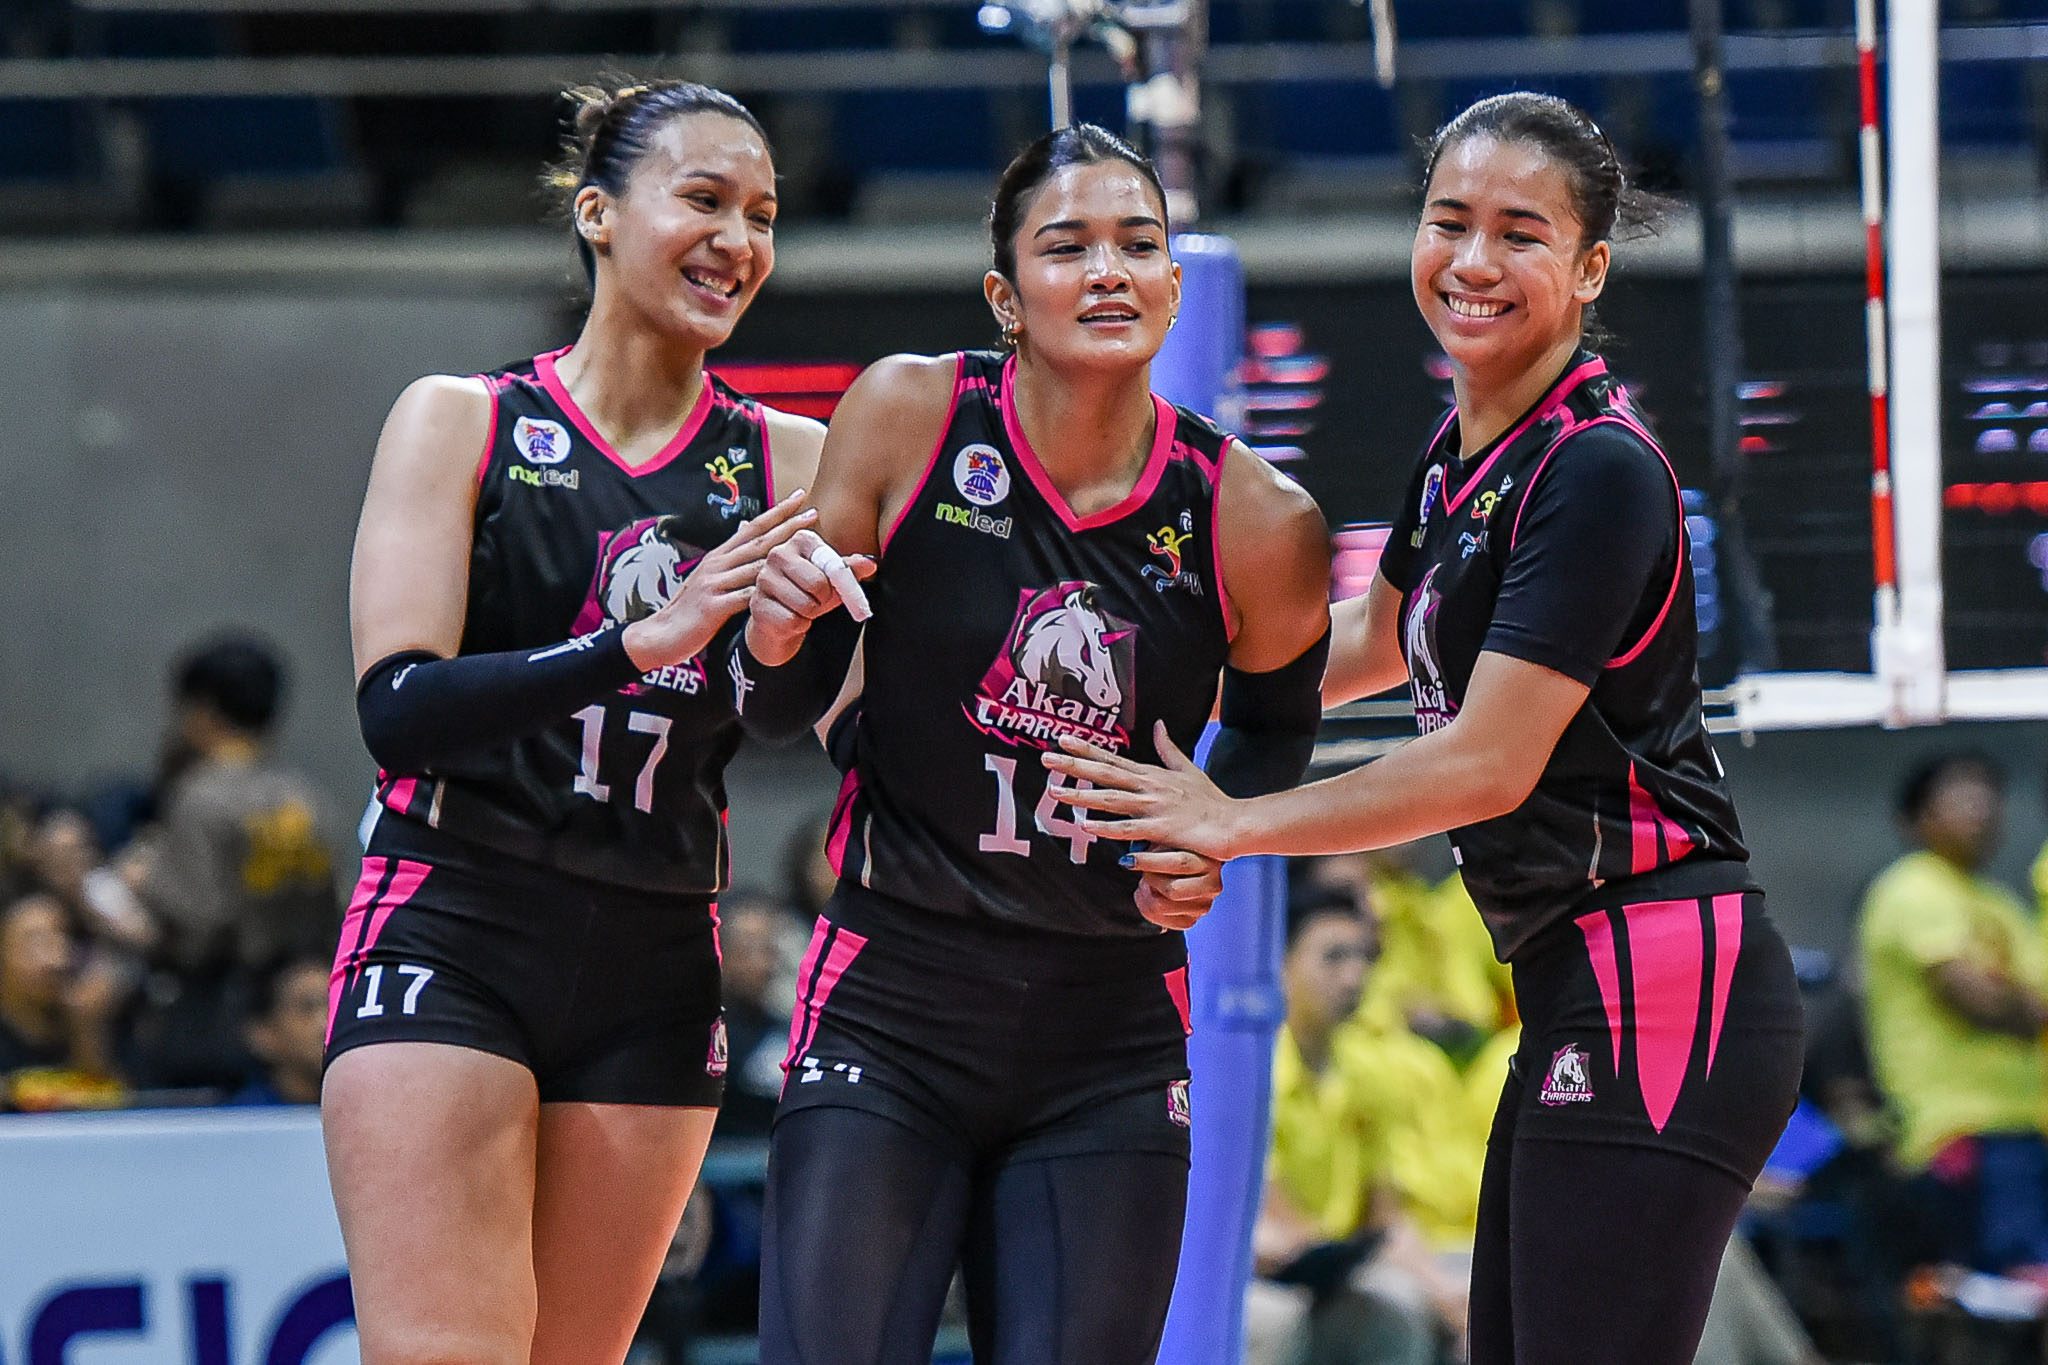 Sharma sizzles in PVL debut as young Akari downs shorthanded F2 in 5-set marathon